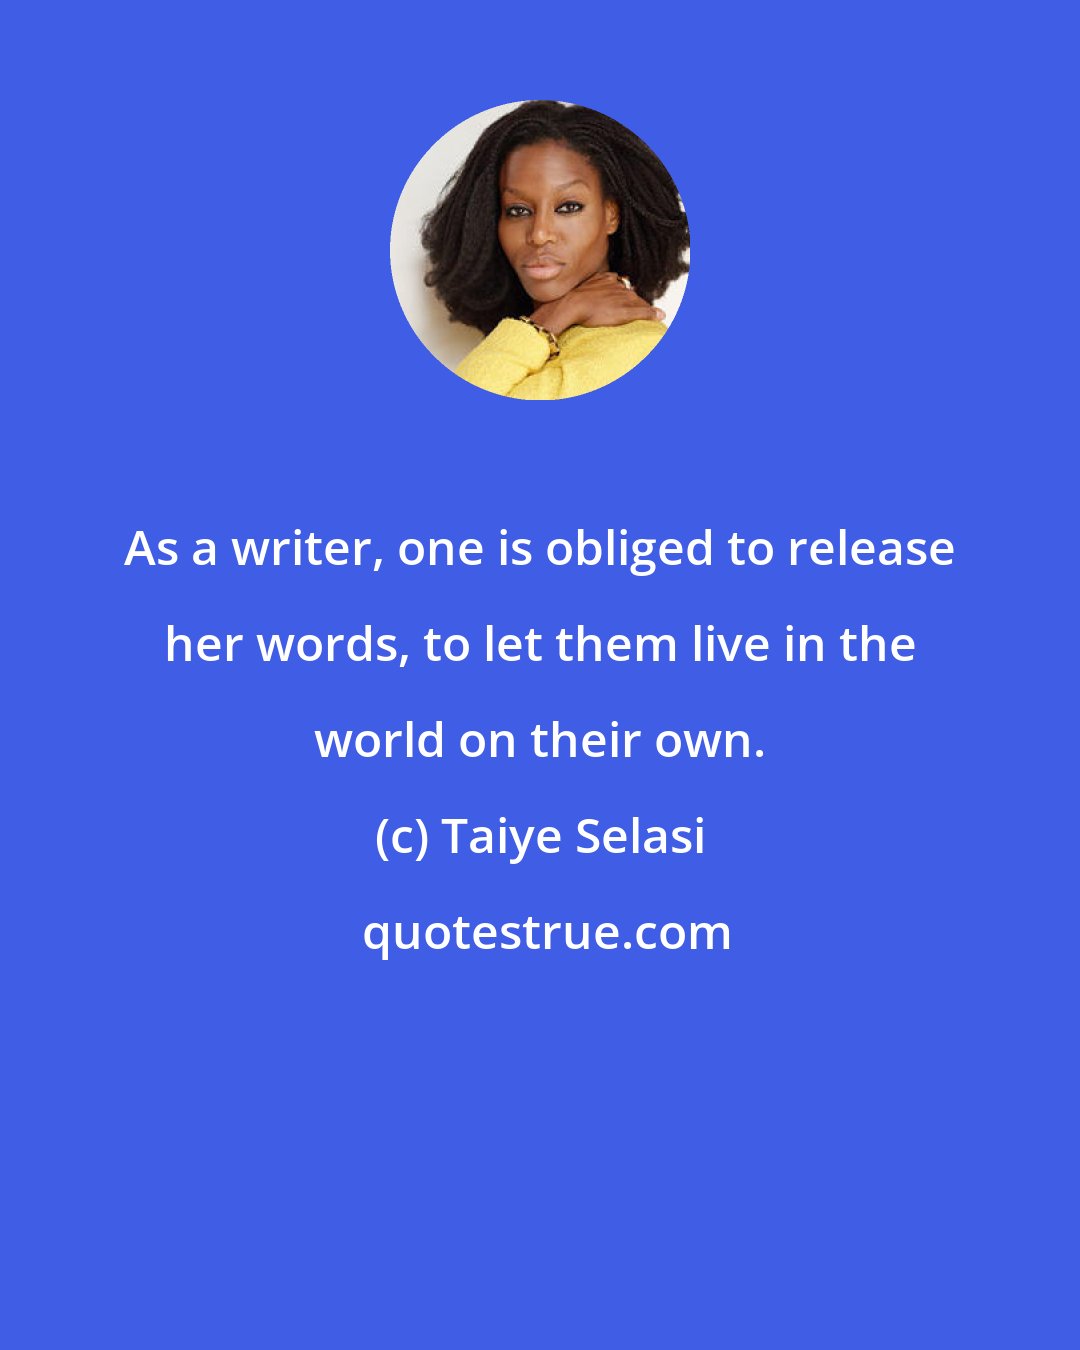 Taiye Selasi: As a writer, one is obliged to release her words, to let them live in the world on their own.